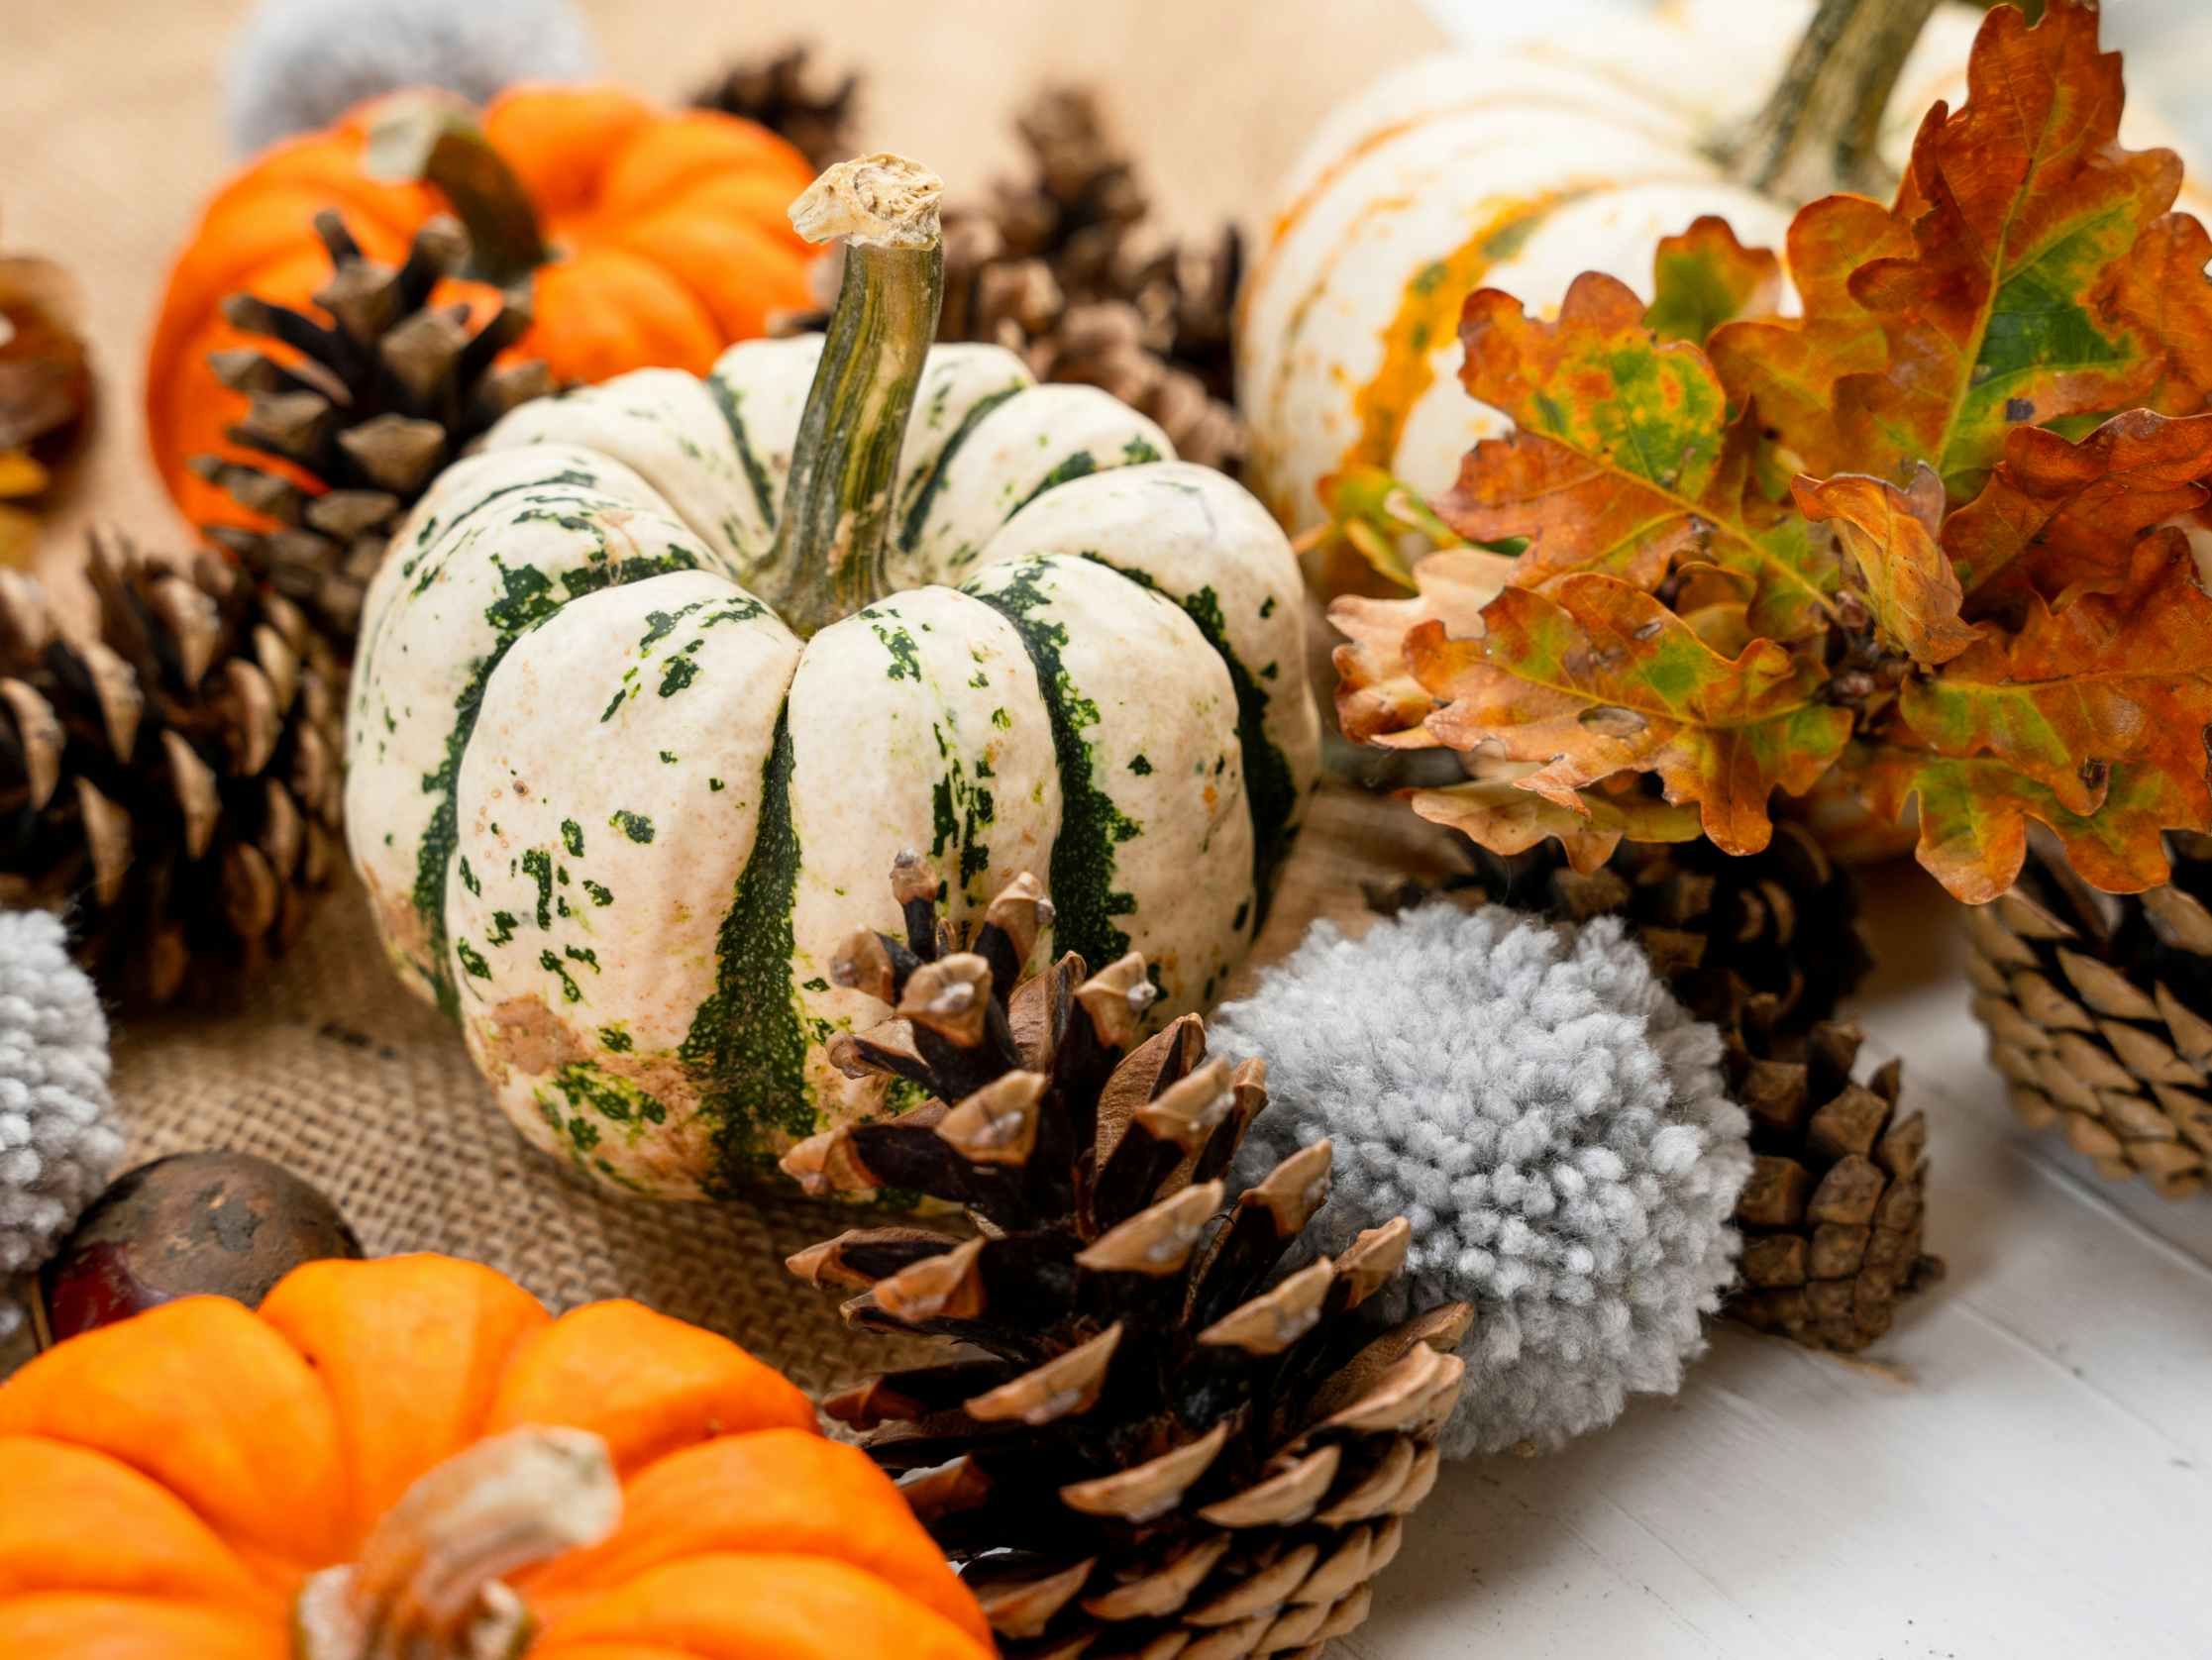 Small pumpkin gourds and pinecones gathered on a table.